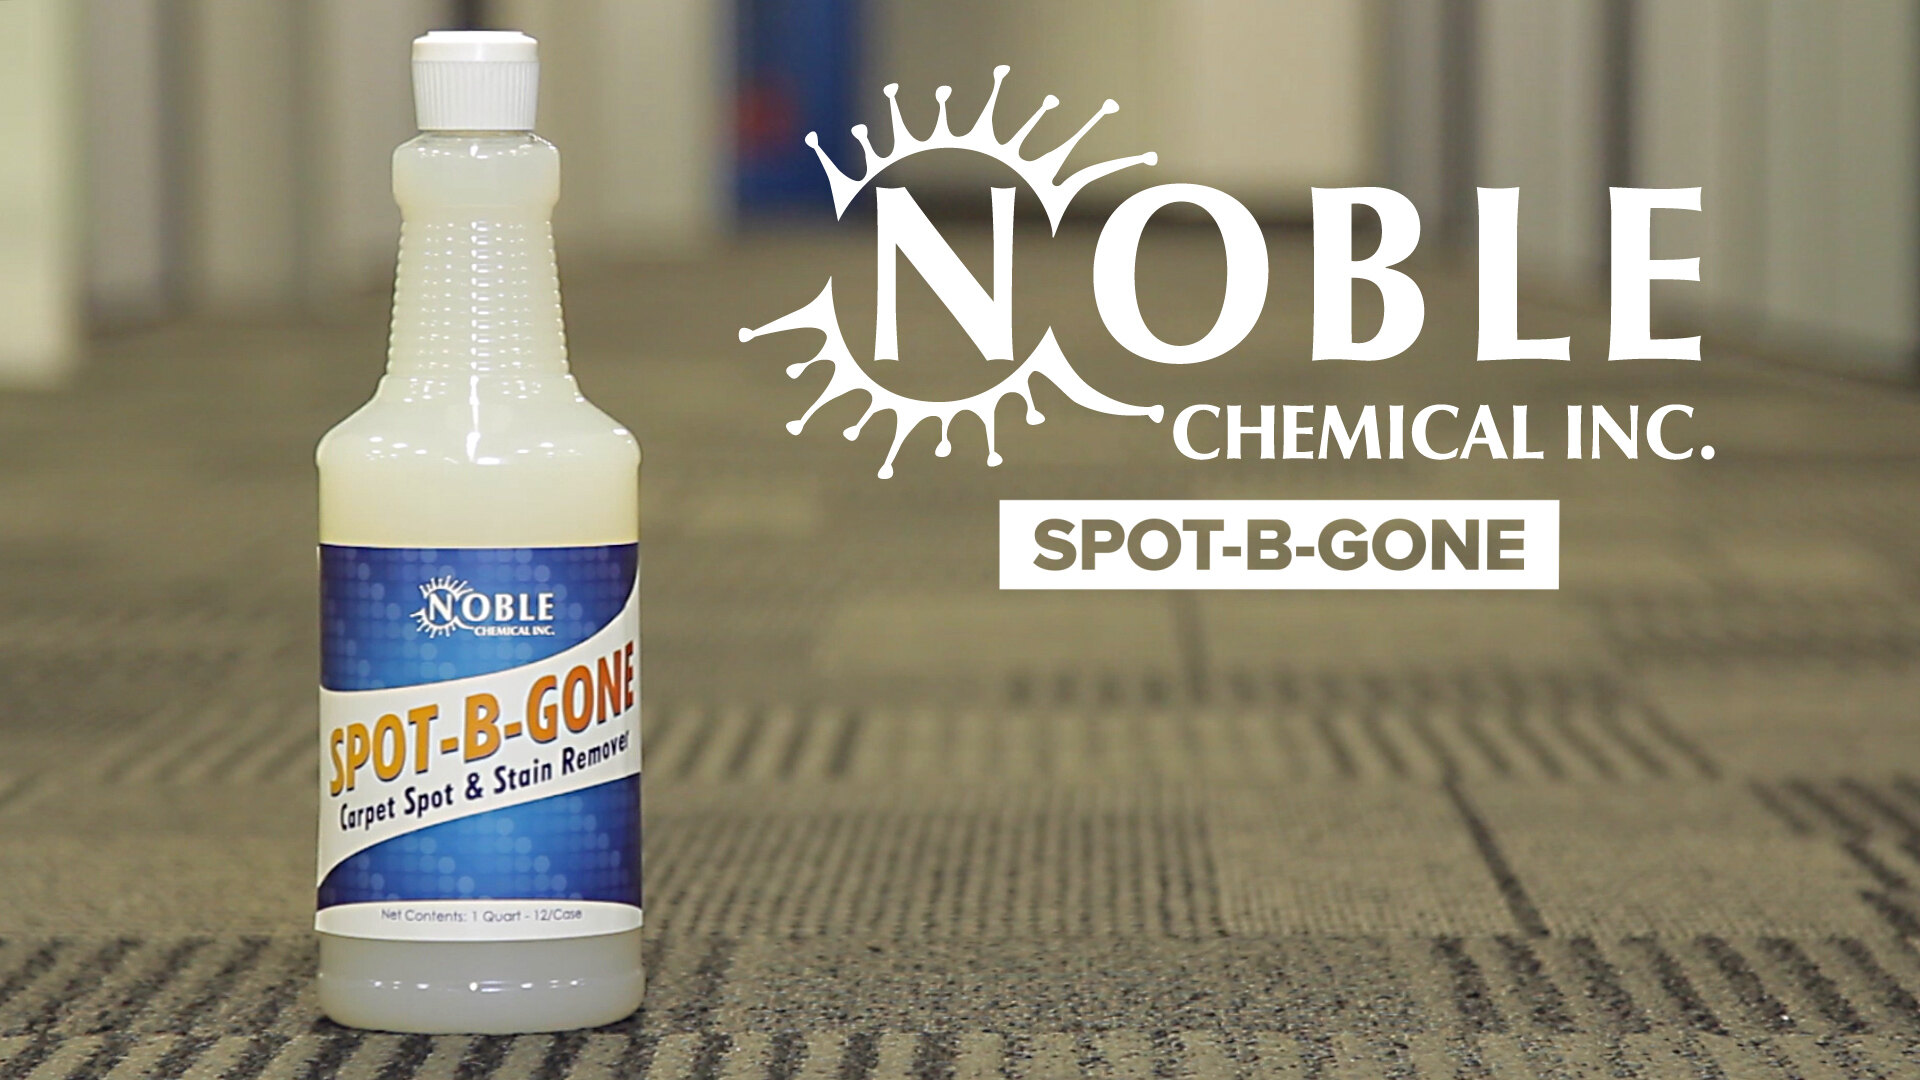 Noble Chemical 32 oz Spot-B-Gone Carpet Spot and Stain Remover